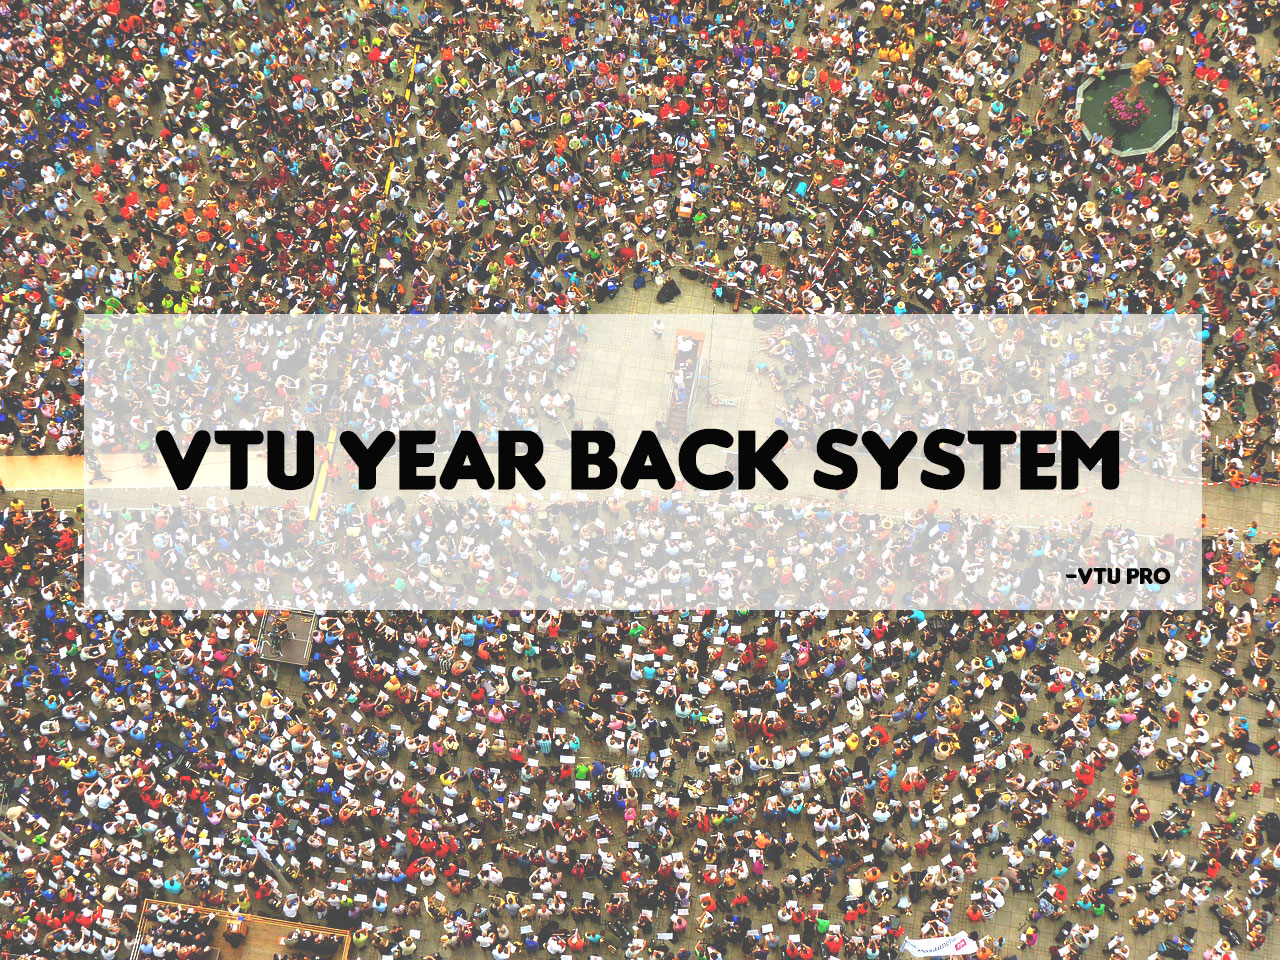 VTU Year back system will be cancelled or not